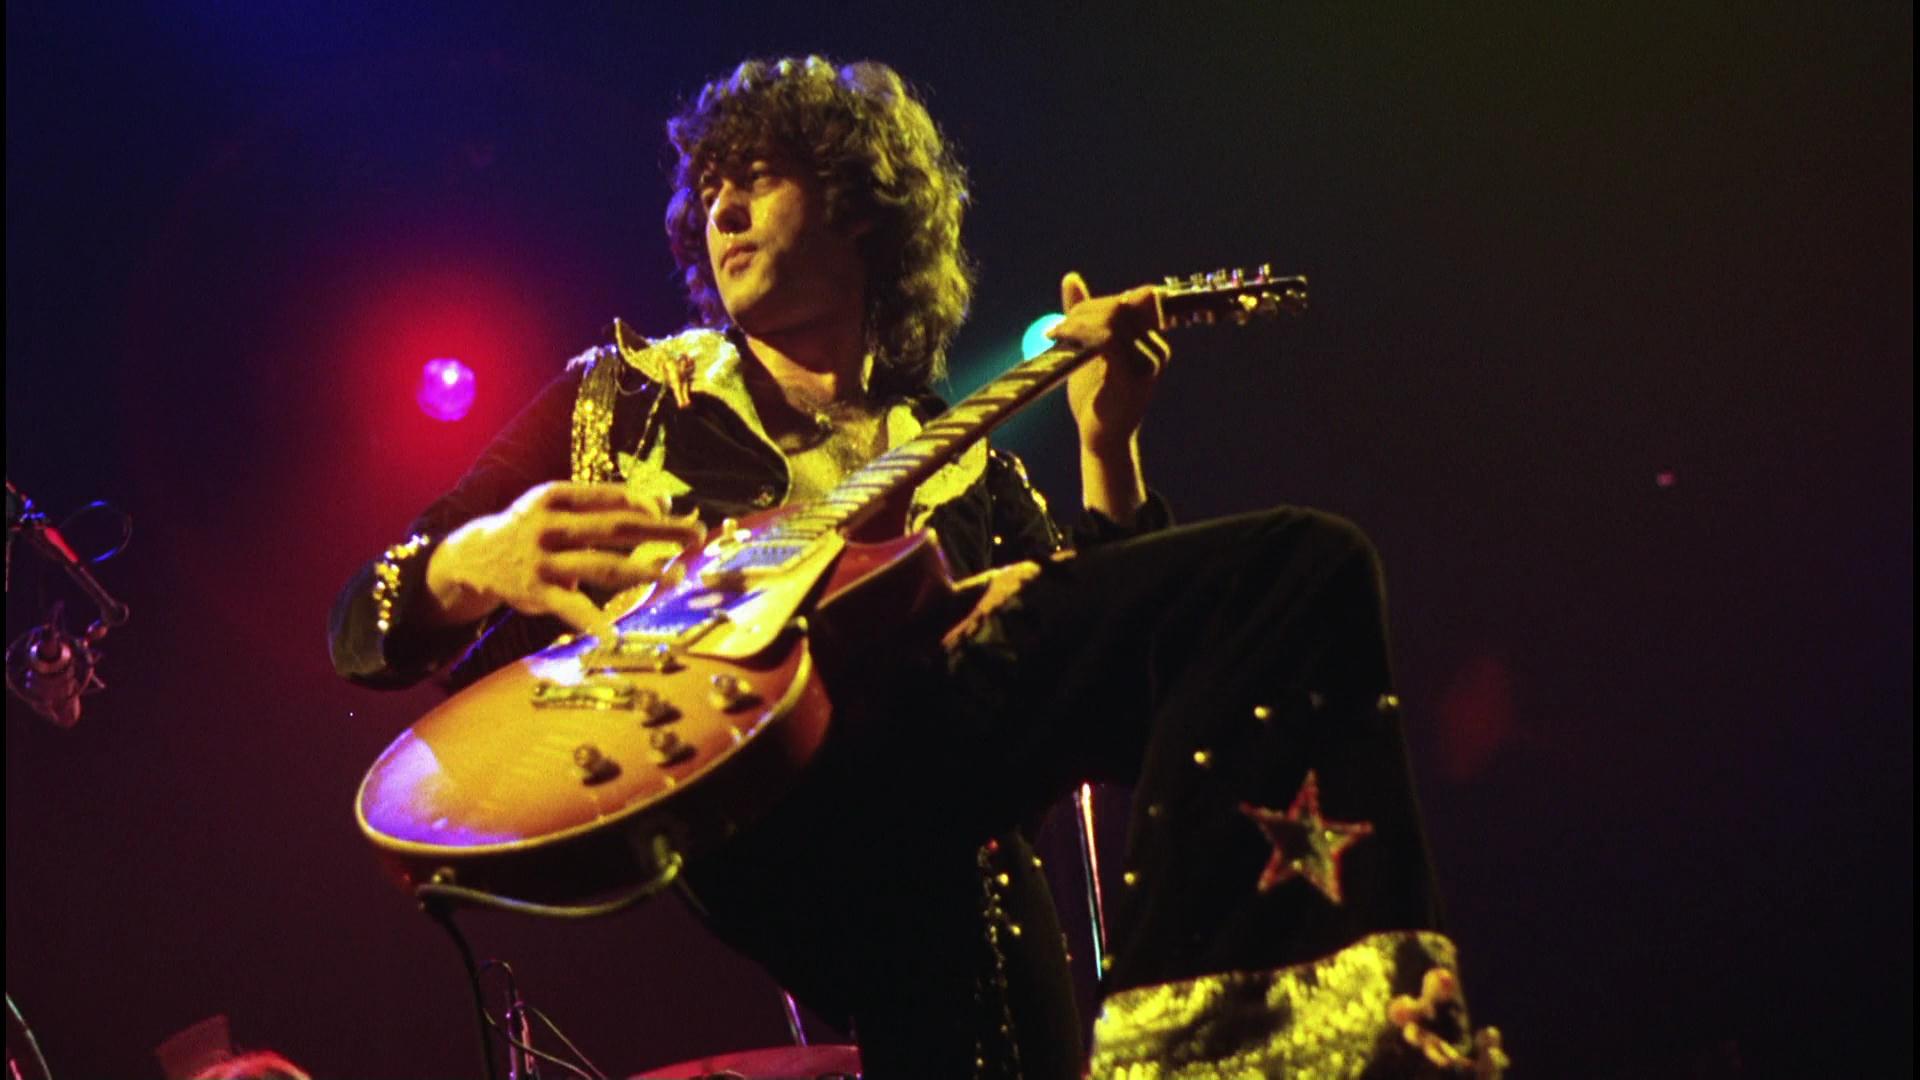  on August 31 2015 By Stephen Comments Off on Jimmy Page HD Wallpapers